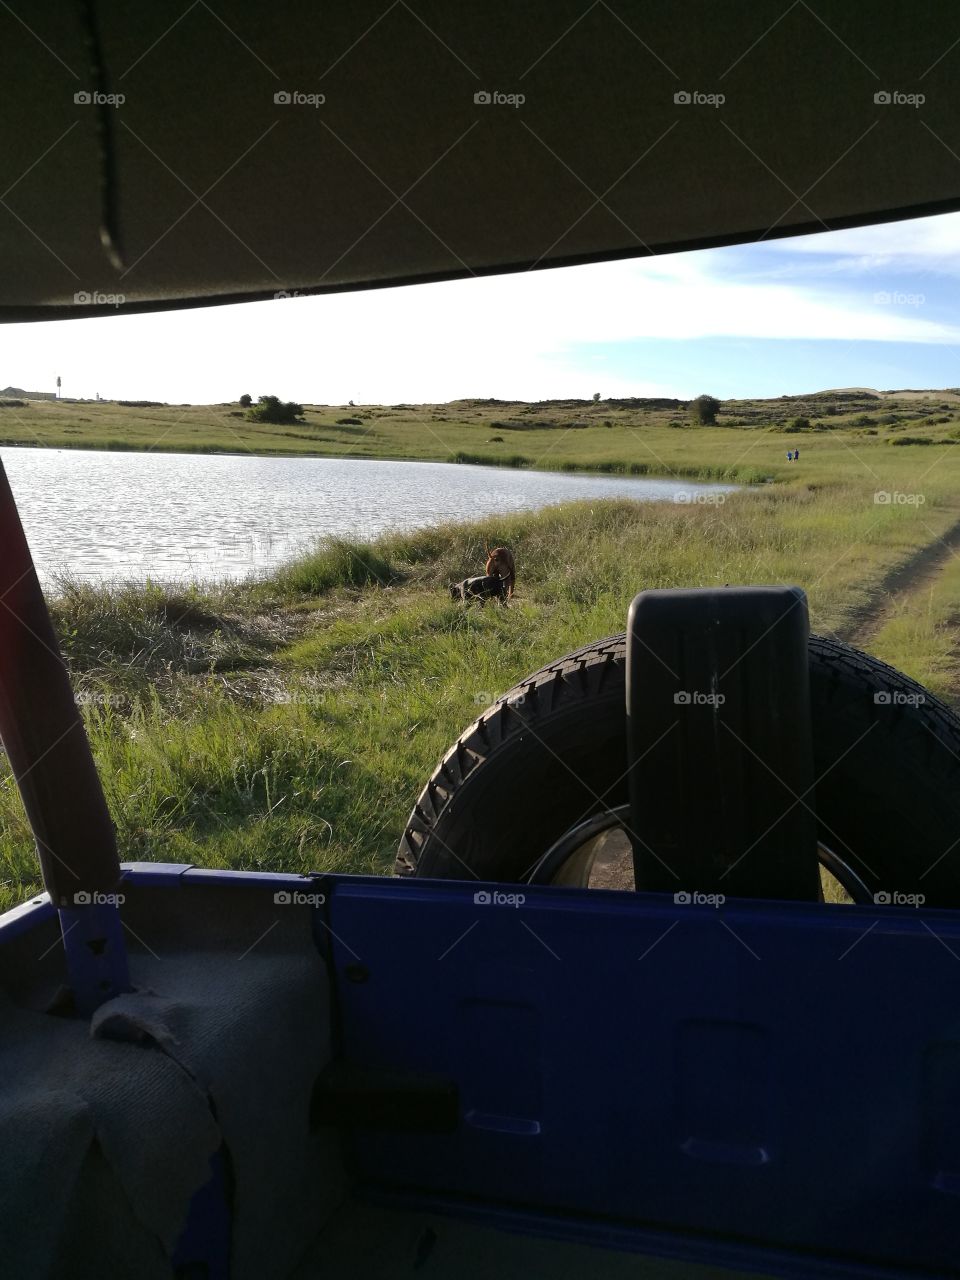 Jeep Wrangler in veld with dogs